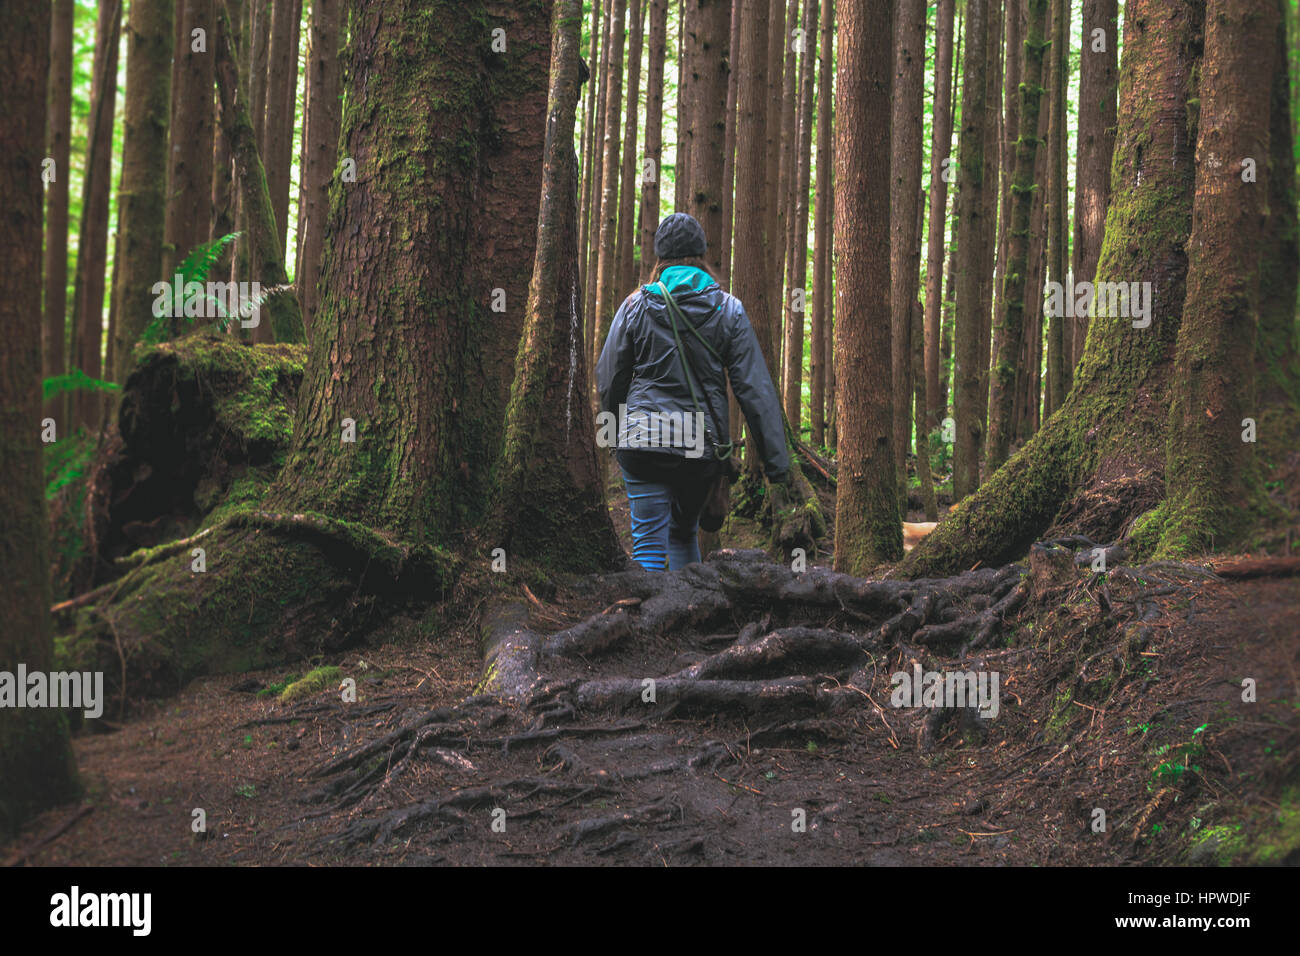 Strong female presence in lush forest Stock Photo